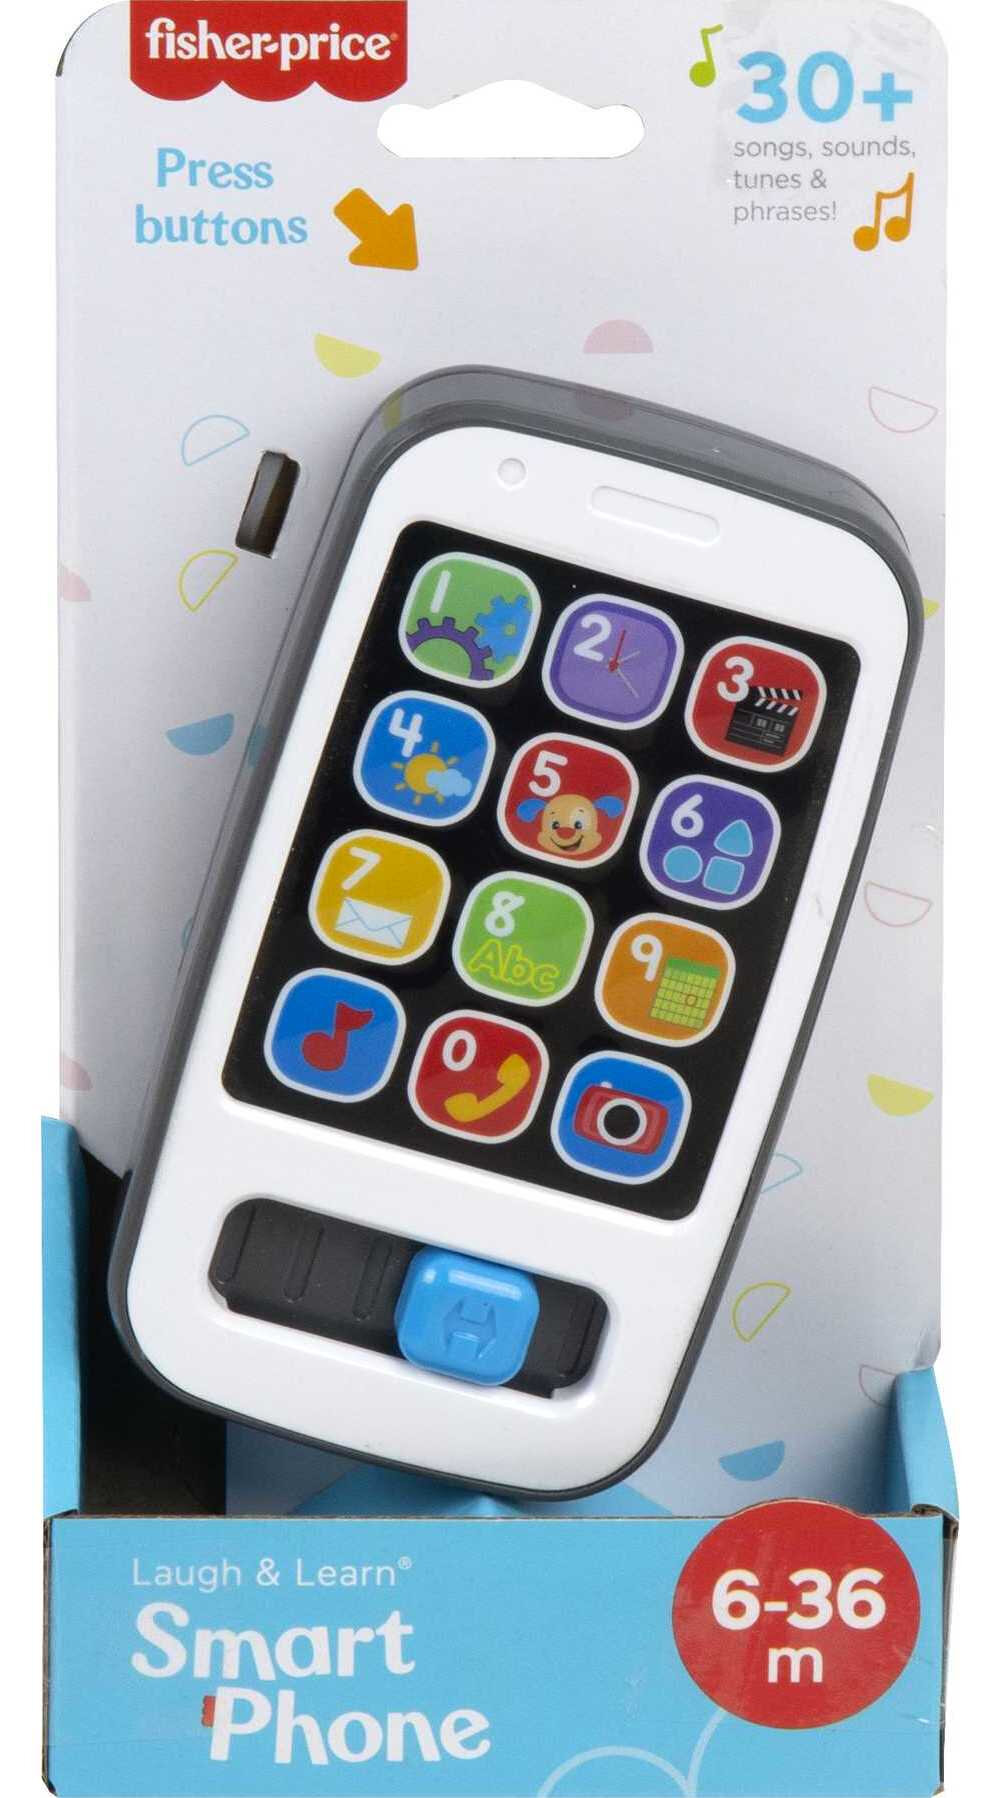 Fisher-Price Laugh & Learn Smart Phone Electronic Baby Learning Toy with Lights & Sounds, Gray - image 5 of 5